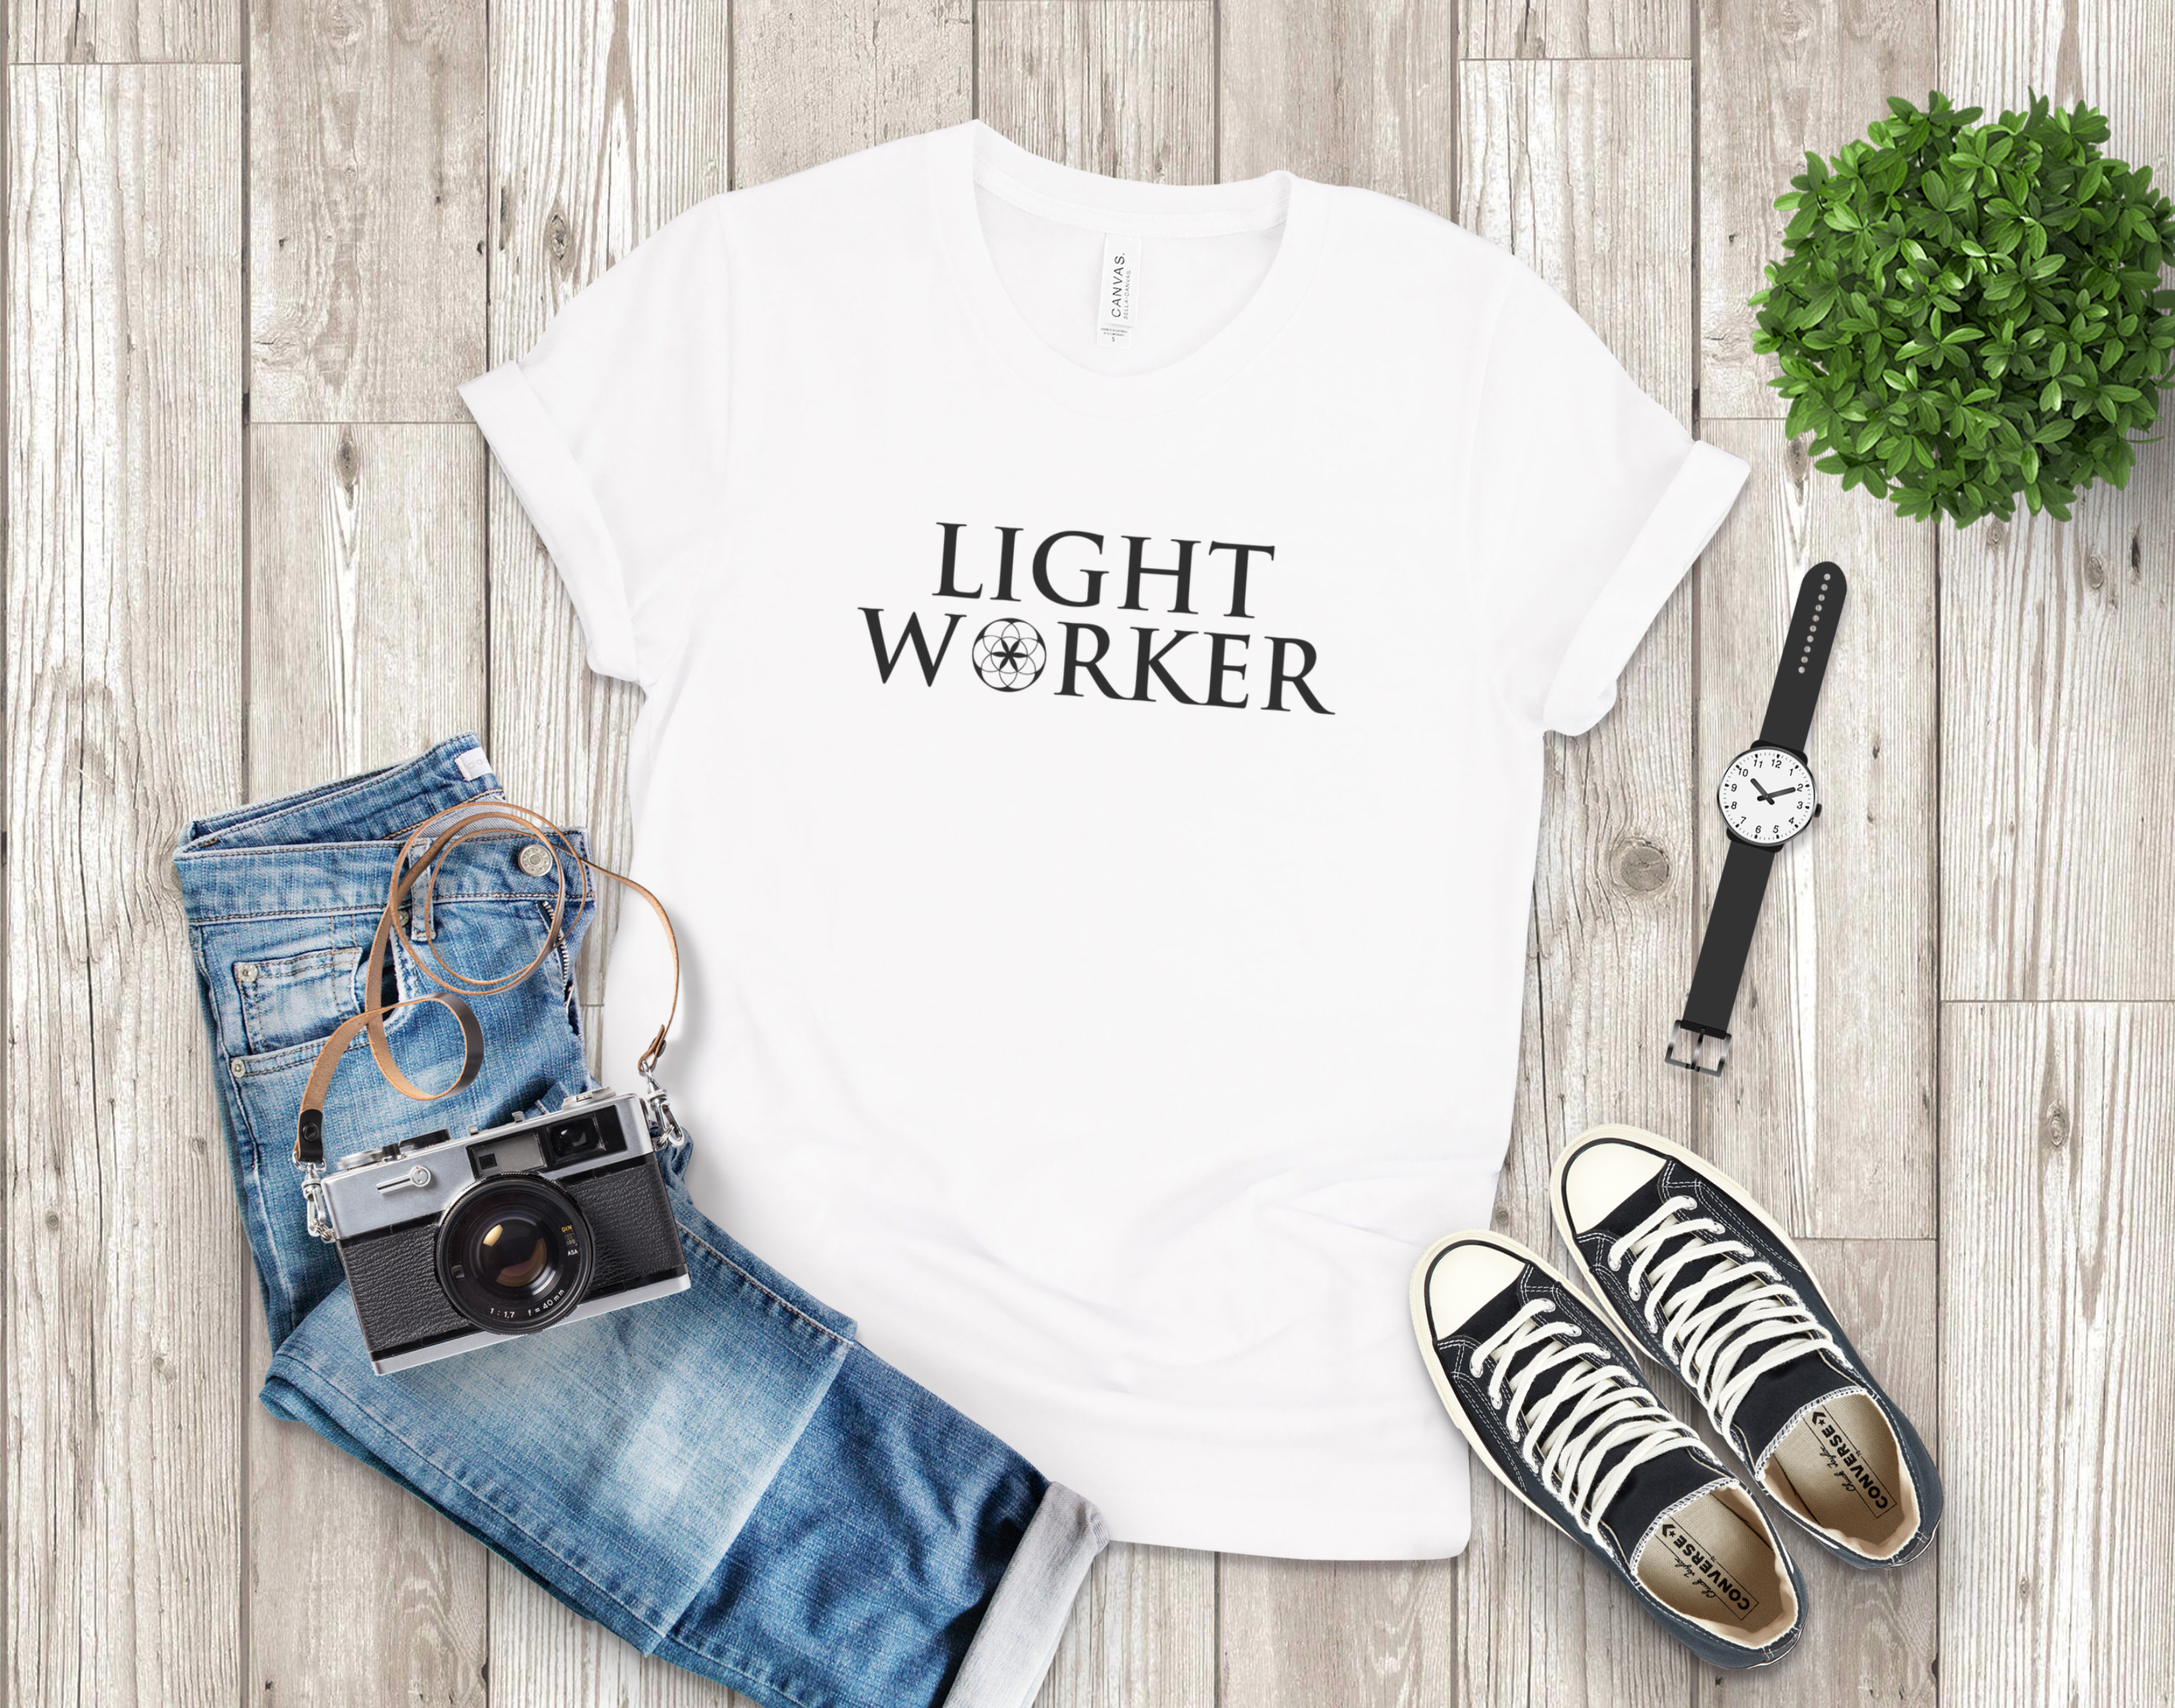 T-Shirts with Positive Sayings